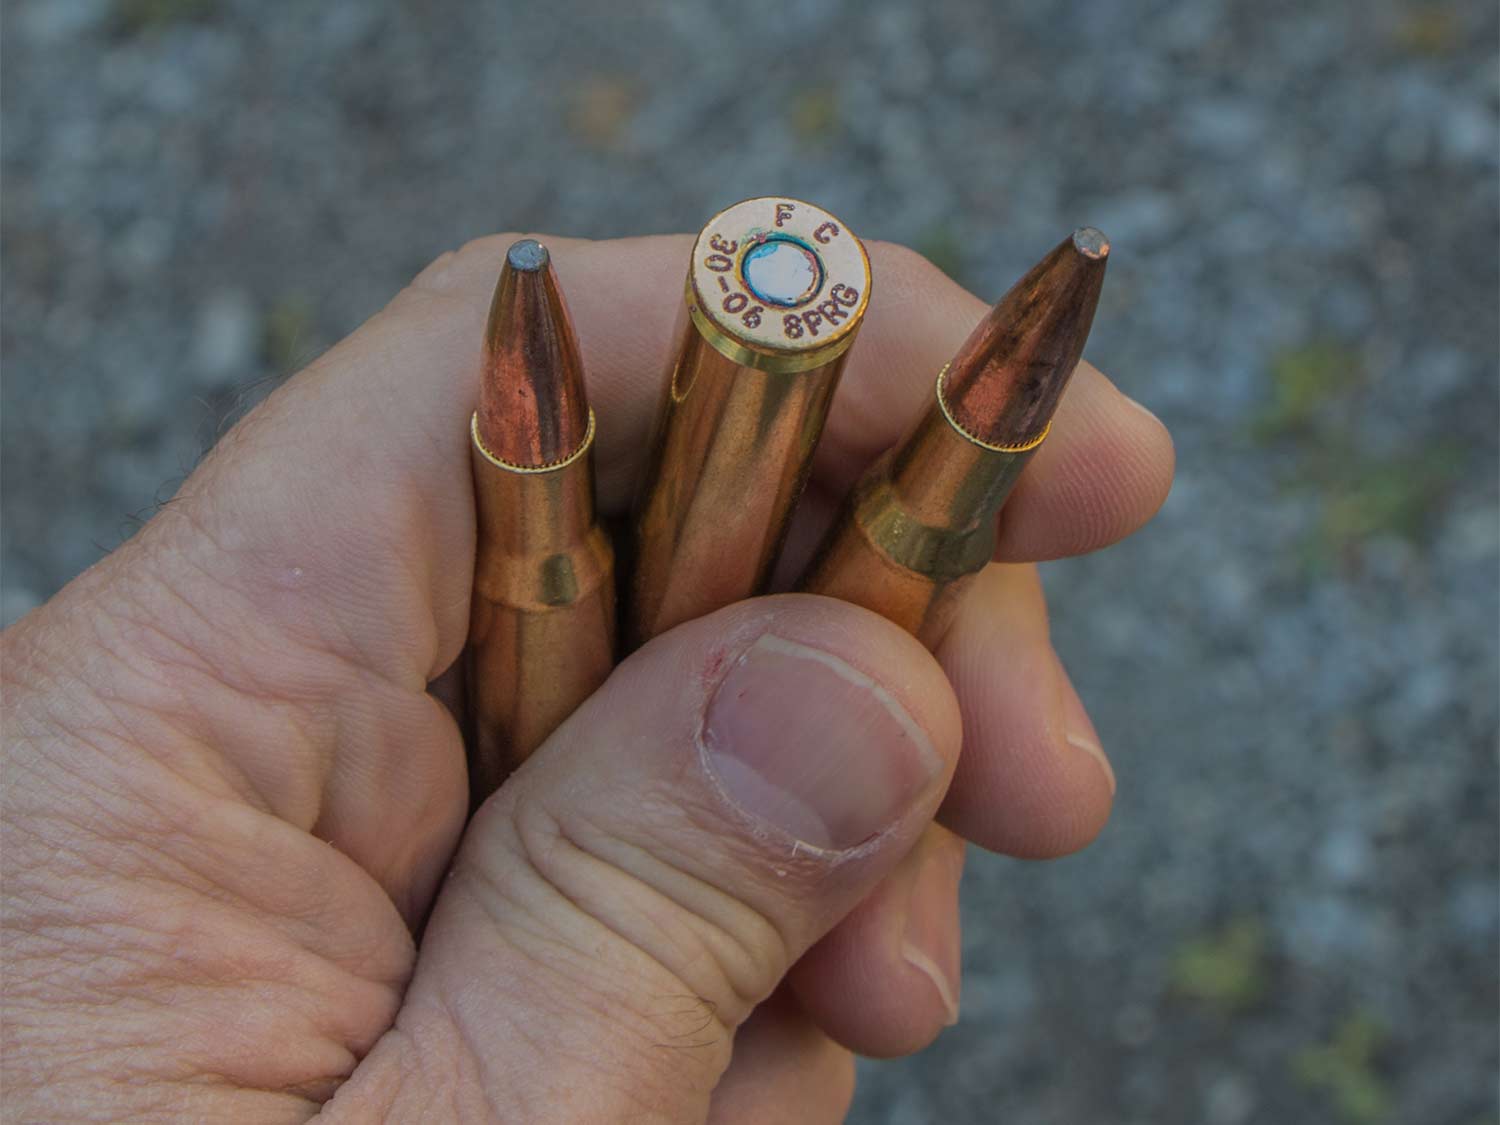 25-06 vs 30-06 Springfield Review & Comparison - Big Game Hunting Blog